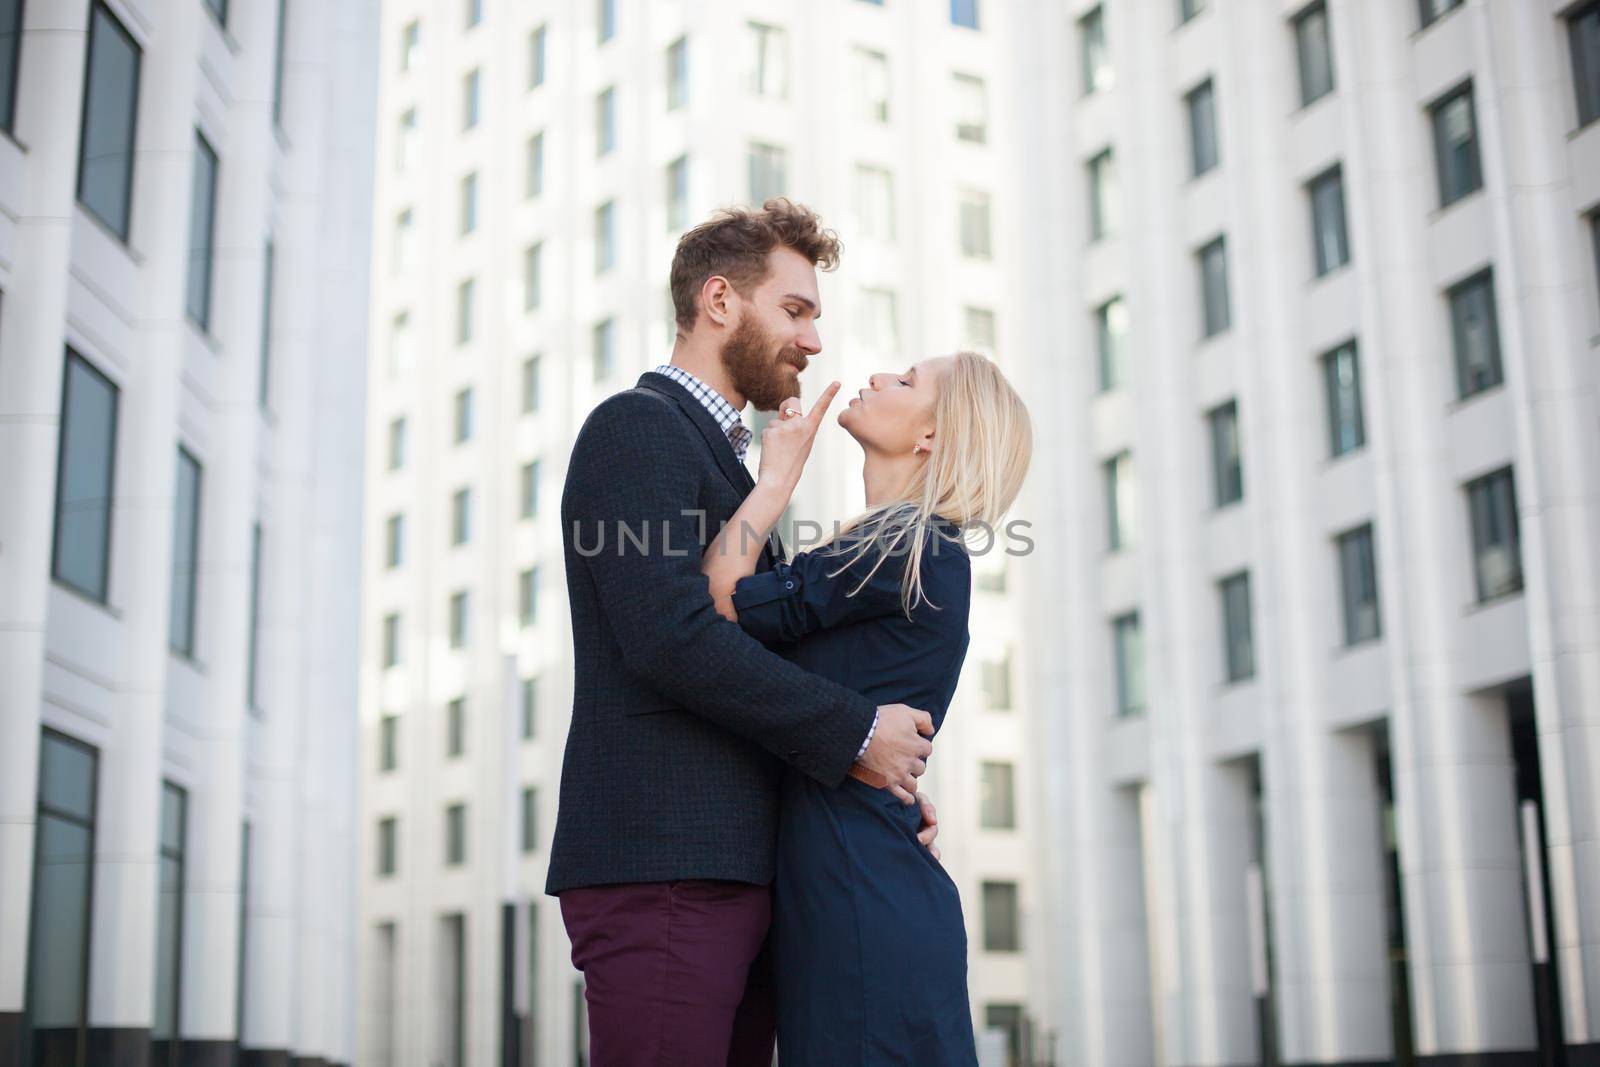 Man and woman hugging and laughing in front of a white building.